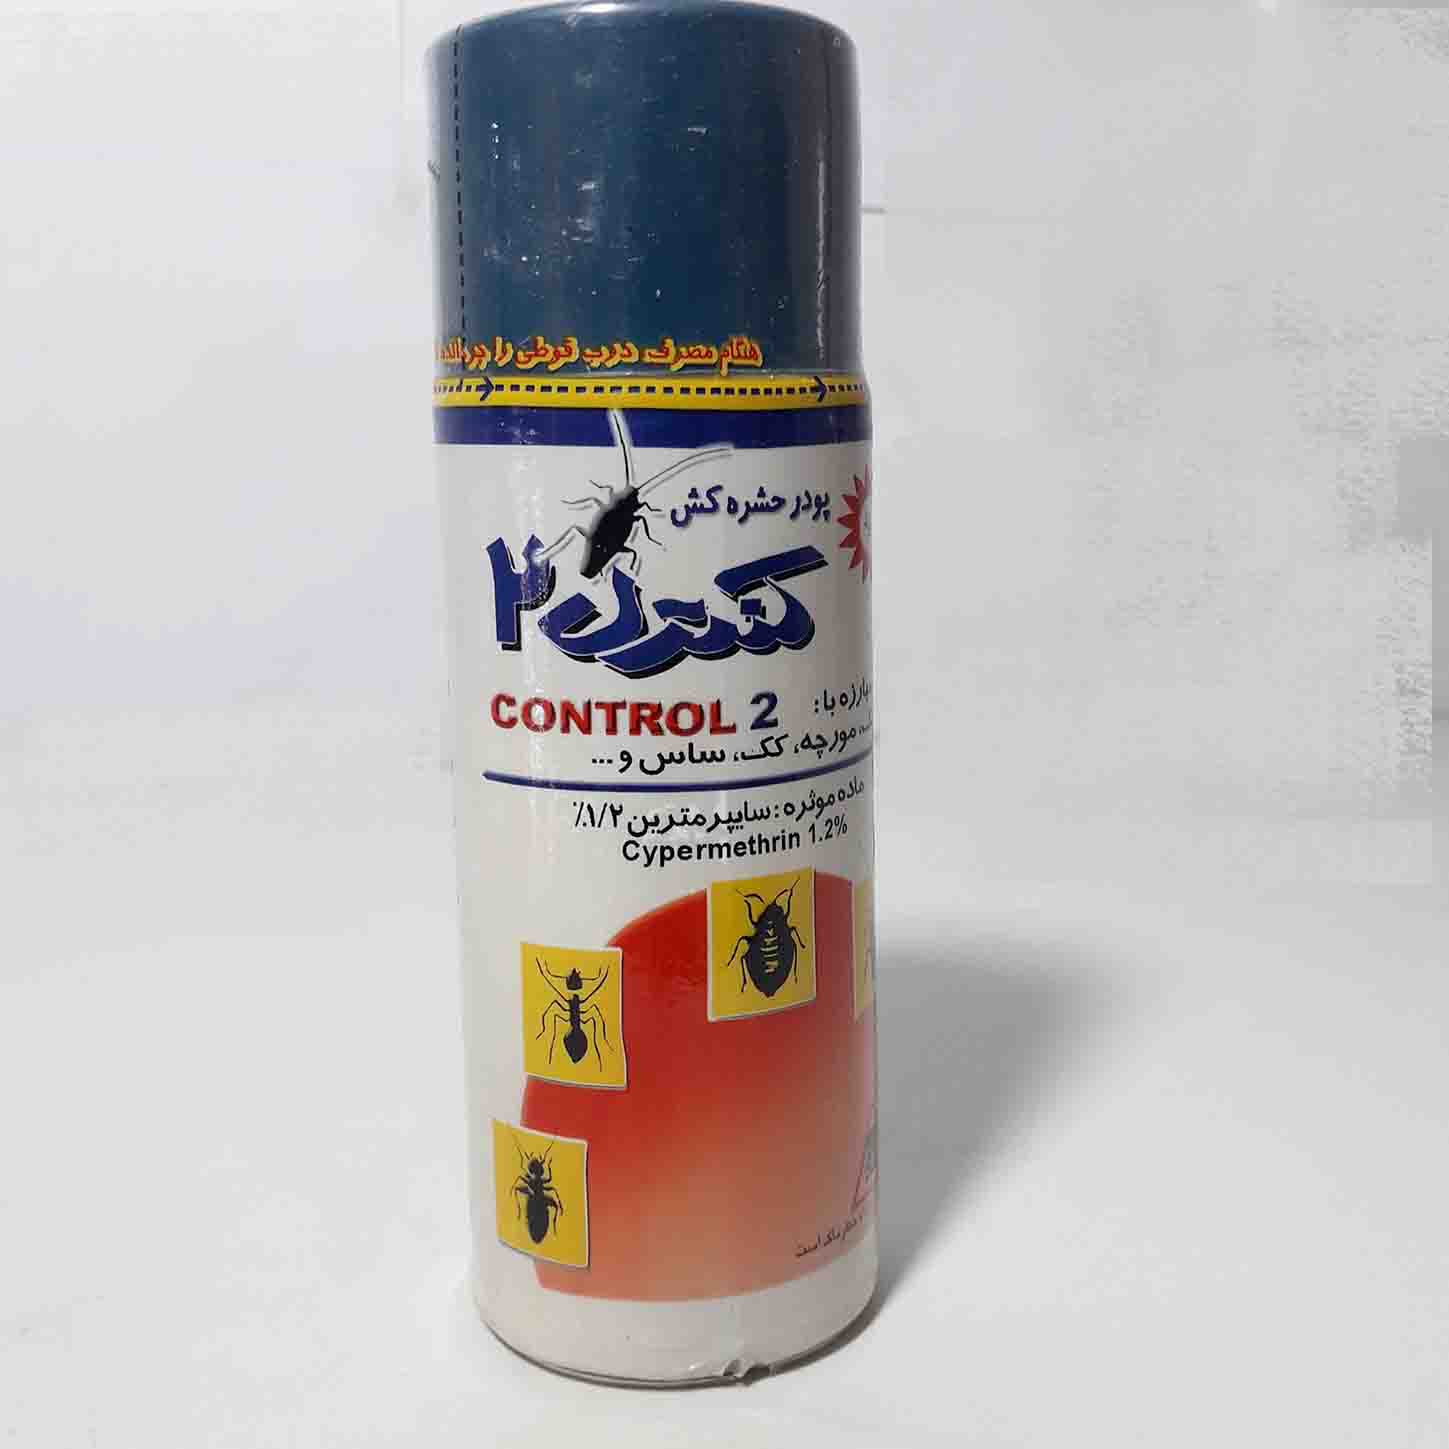 Control 2 insecticide powder